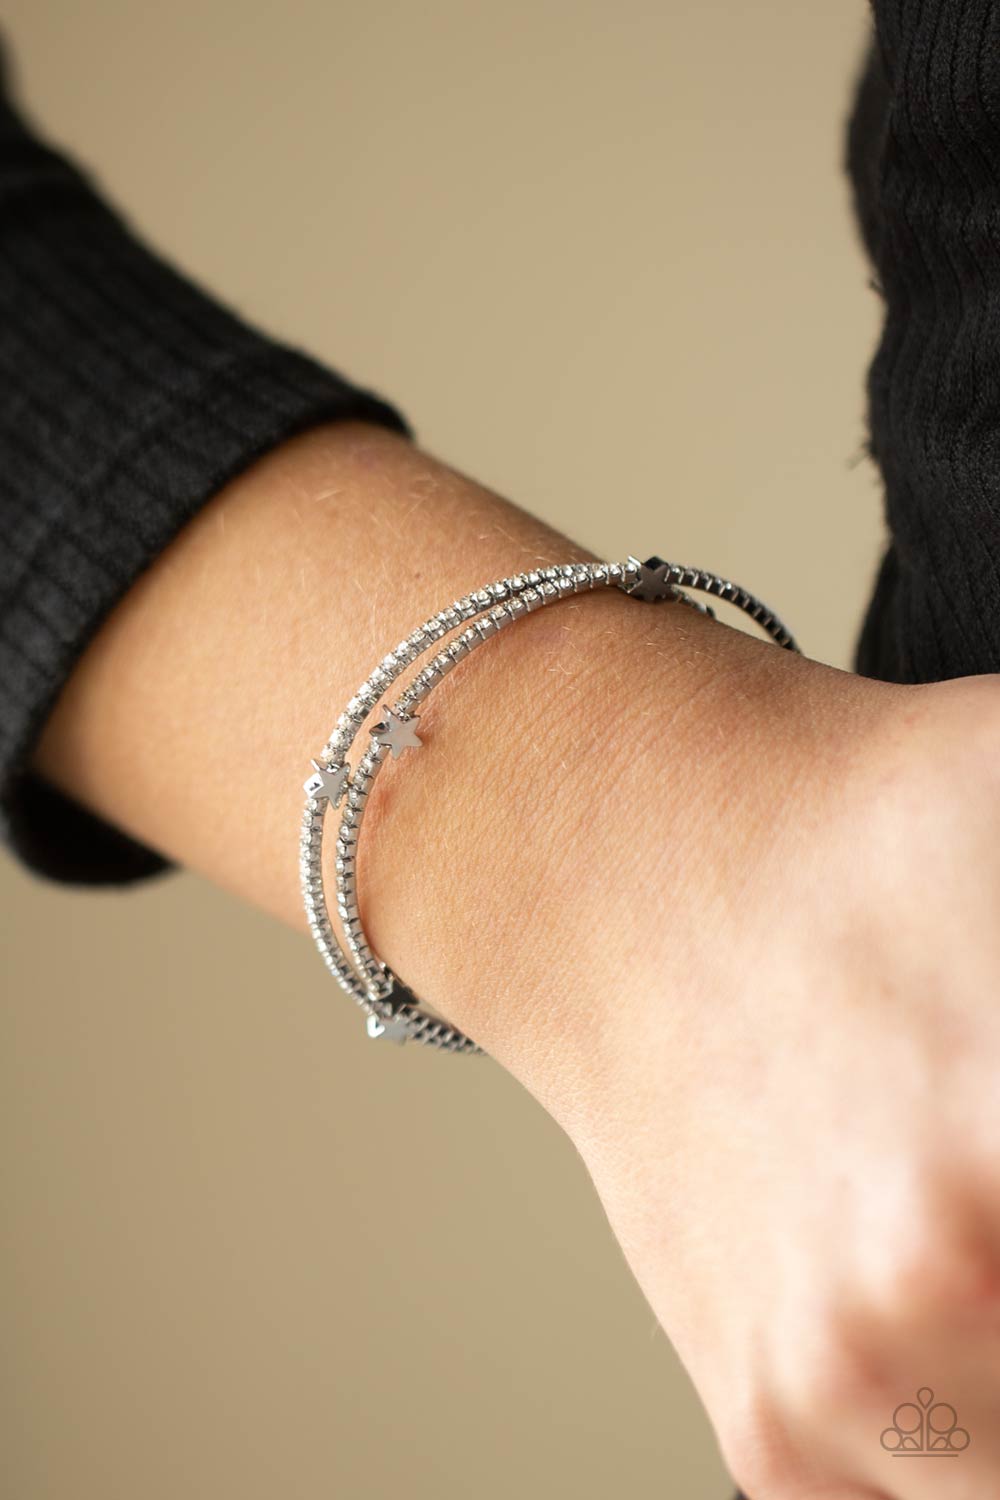 &lt;P&gt;Dotted with dainty silver star charms, a bendable row of glittery white rhinestones spirals around the wrist, creating a sparkly infinity wrap bracelet. &lt;/P&gt;

&lt;P&gt;&lt;I&gt; Sold as one individual bracelet. &lt;/I&gt;&lt;/p&gt;


&lt;img src=\&quot;https://d9b54x484lq62.cloudfront.net/paparazzi/shopping/images/517_tag150x115_1.png\&quot; alt=\&quot;New Kit\&quot; align=\&quot;middle\&quot; height=\&quot;50\&quot; width=\&quot;50\&quot;/&gt;